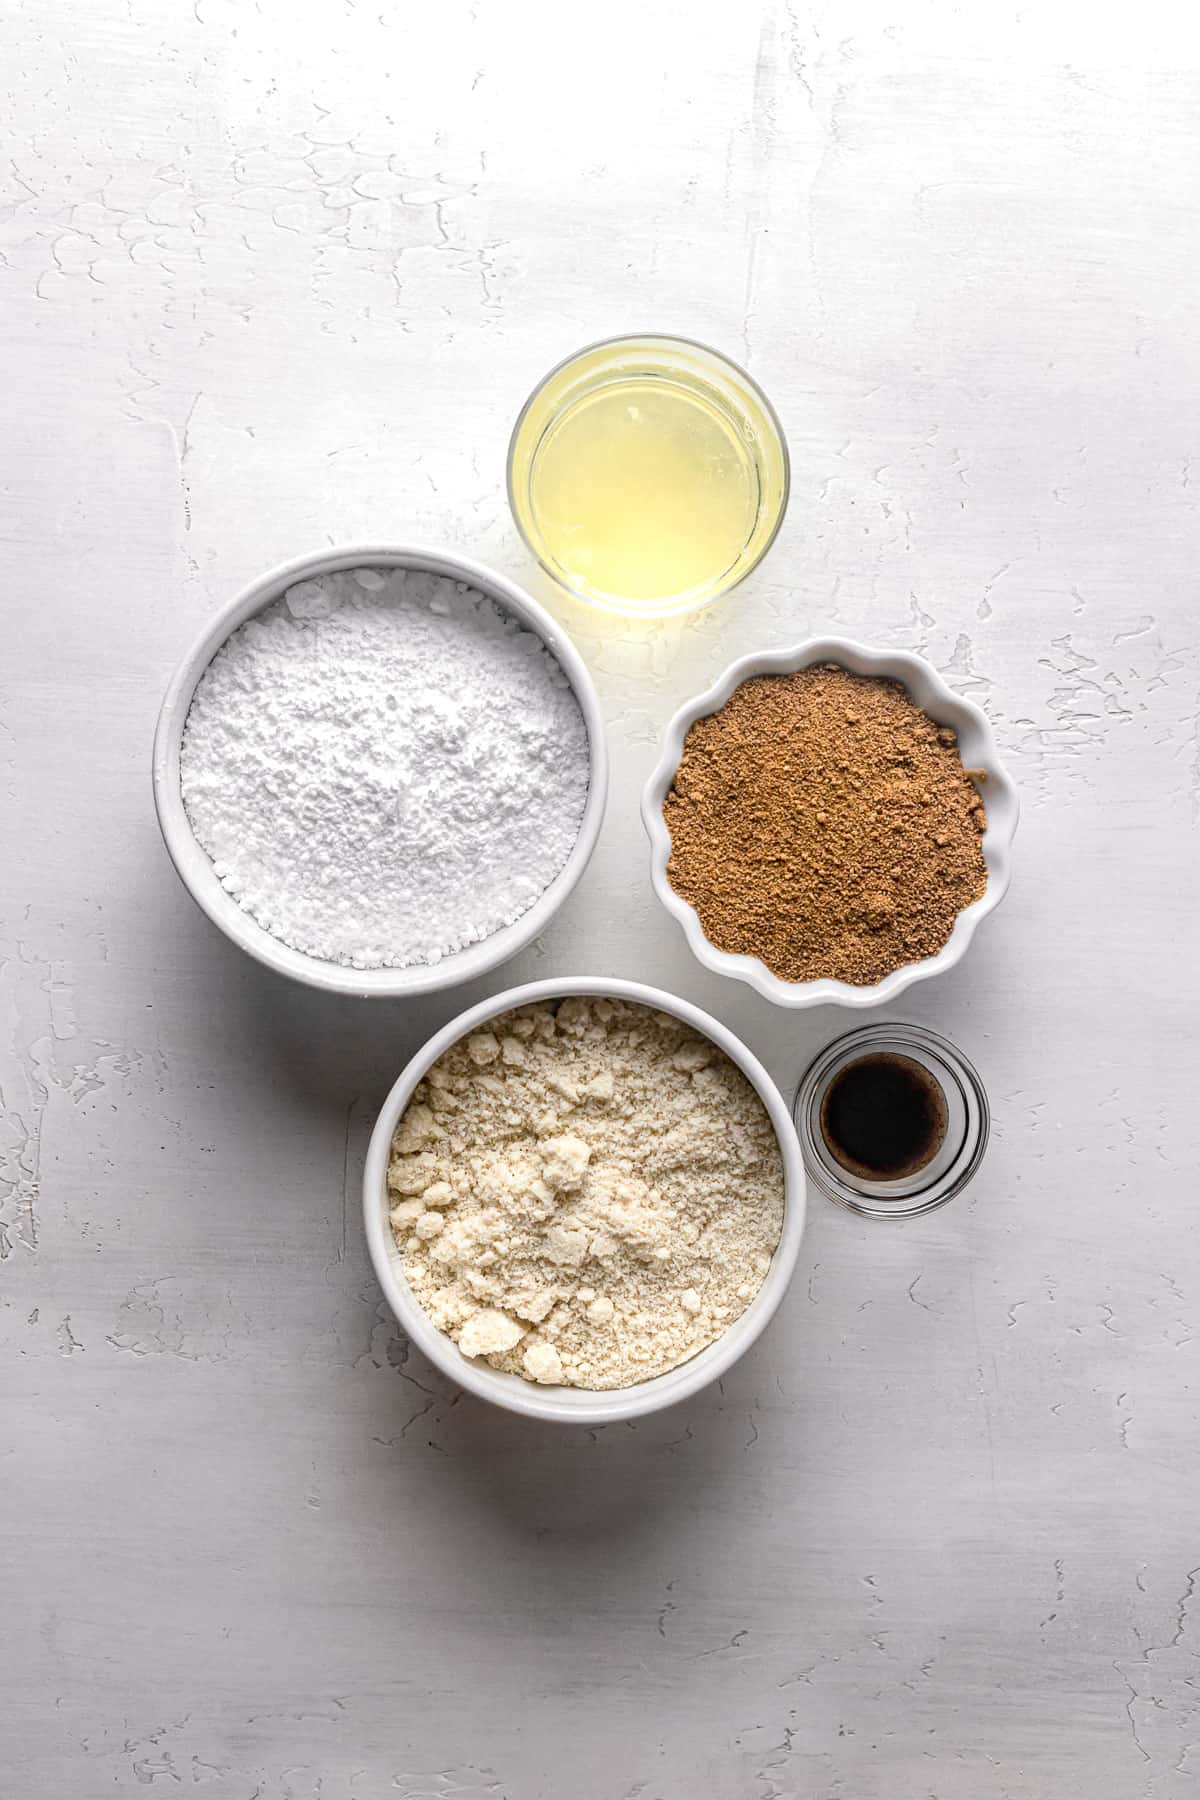 ingredients for the brown sugar macarons.